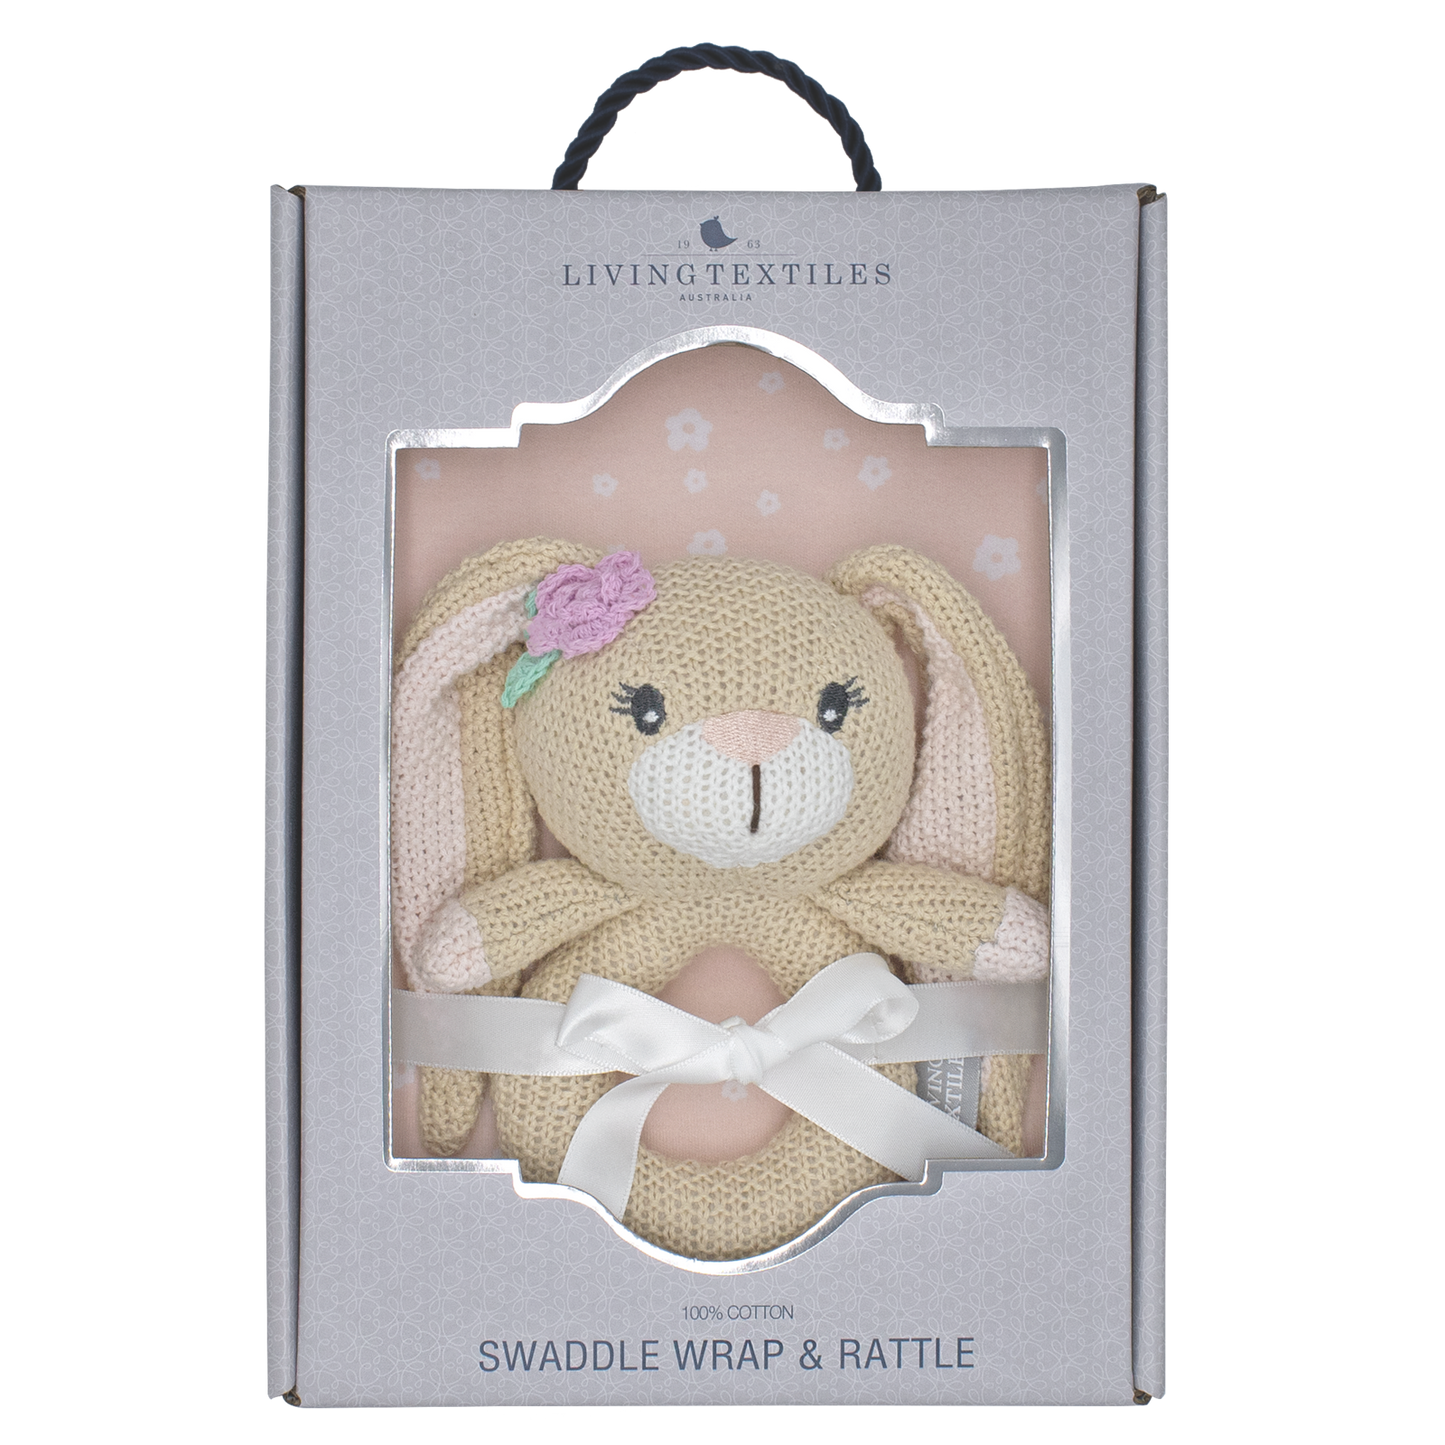 Jersey Swaddle & Rattle Gift Set - Floral/Bunny